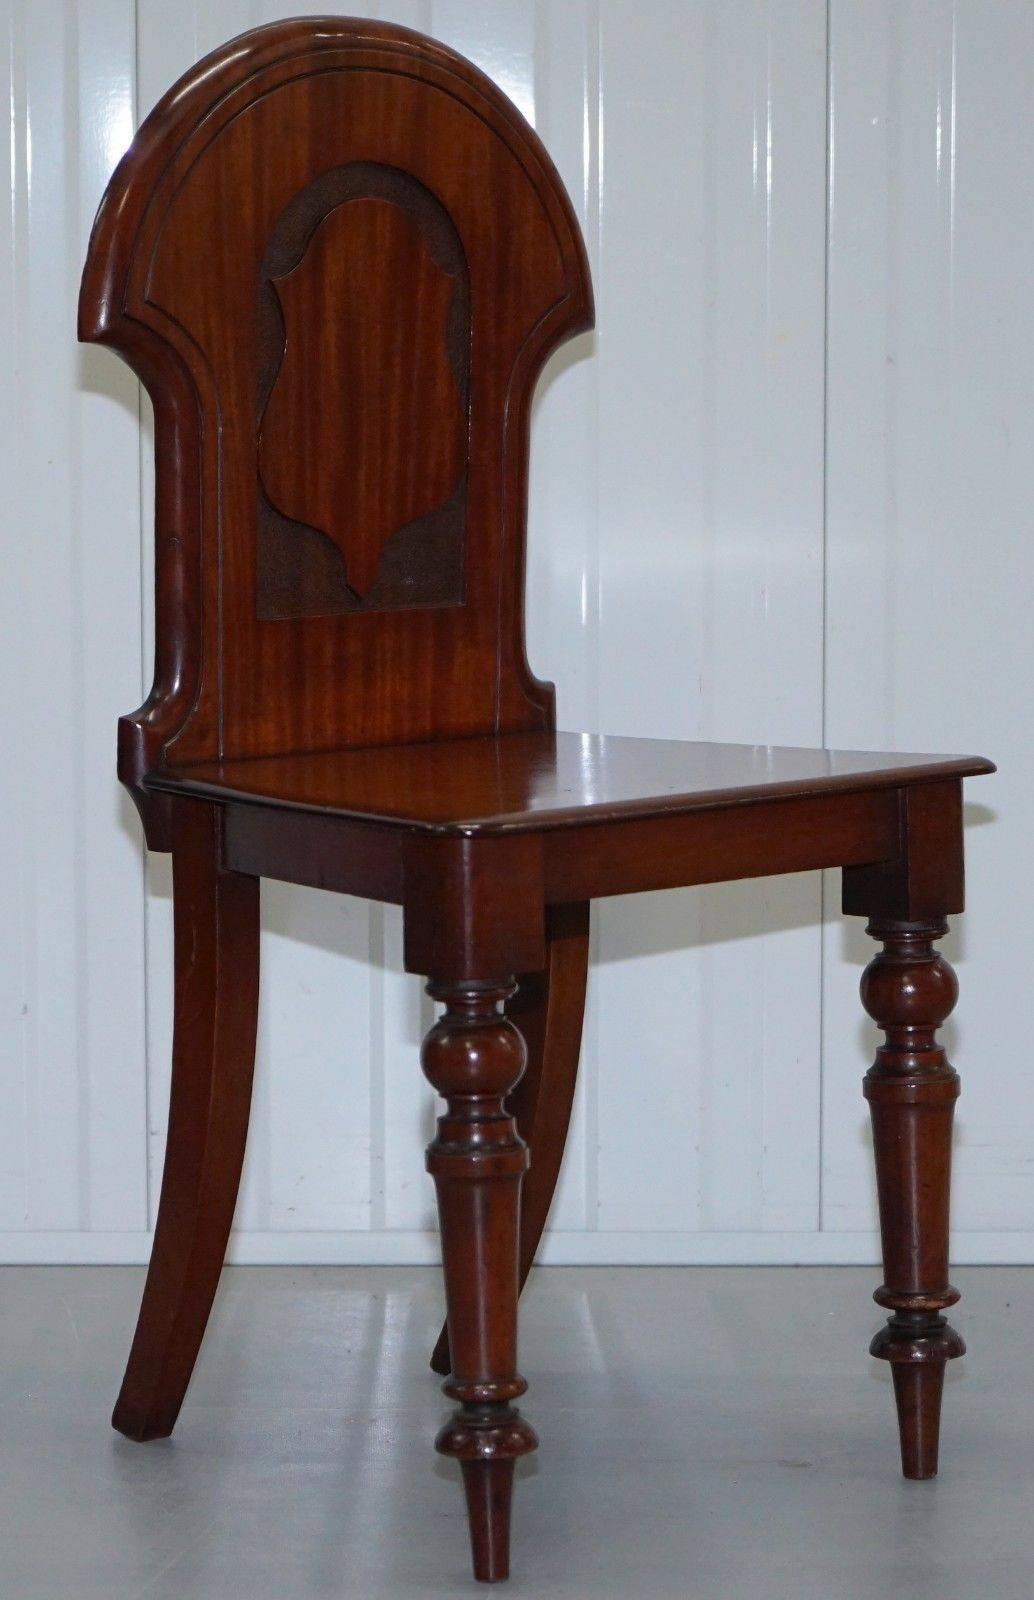 We are delighted to offer for sale this stunning pair of Regency mahogany shield back hall chairs, circa 1830

A very good looking and well-made pair with a nice vintage patina, we have cleaned waxed and polished them from top to